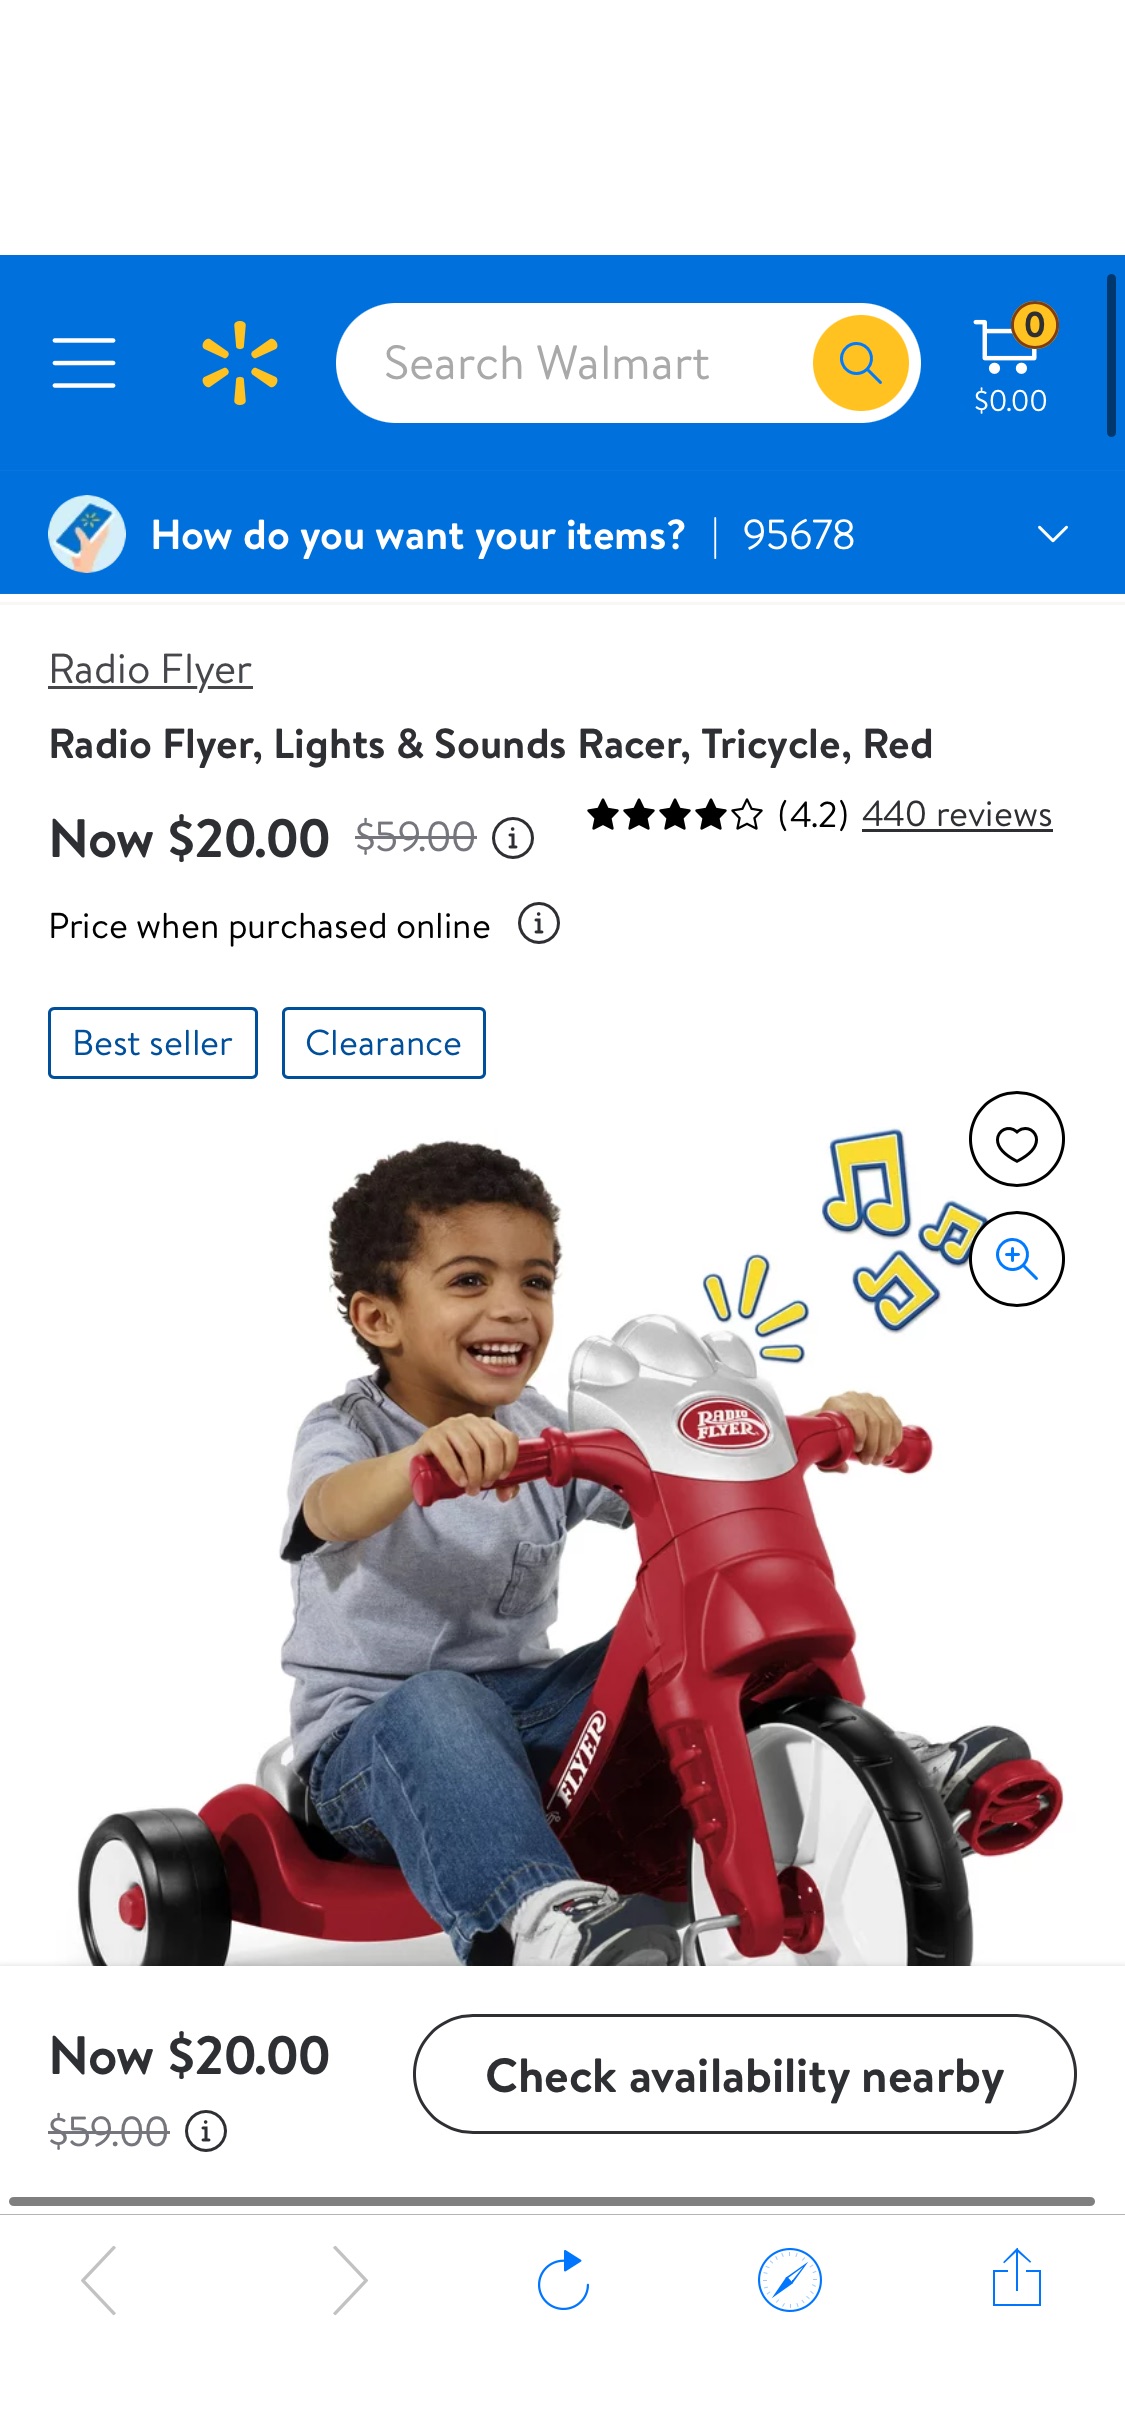 Radio Flyer, Lights & Sounds Racer, Tricycle, Red - Walmart.com